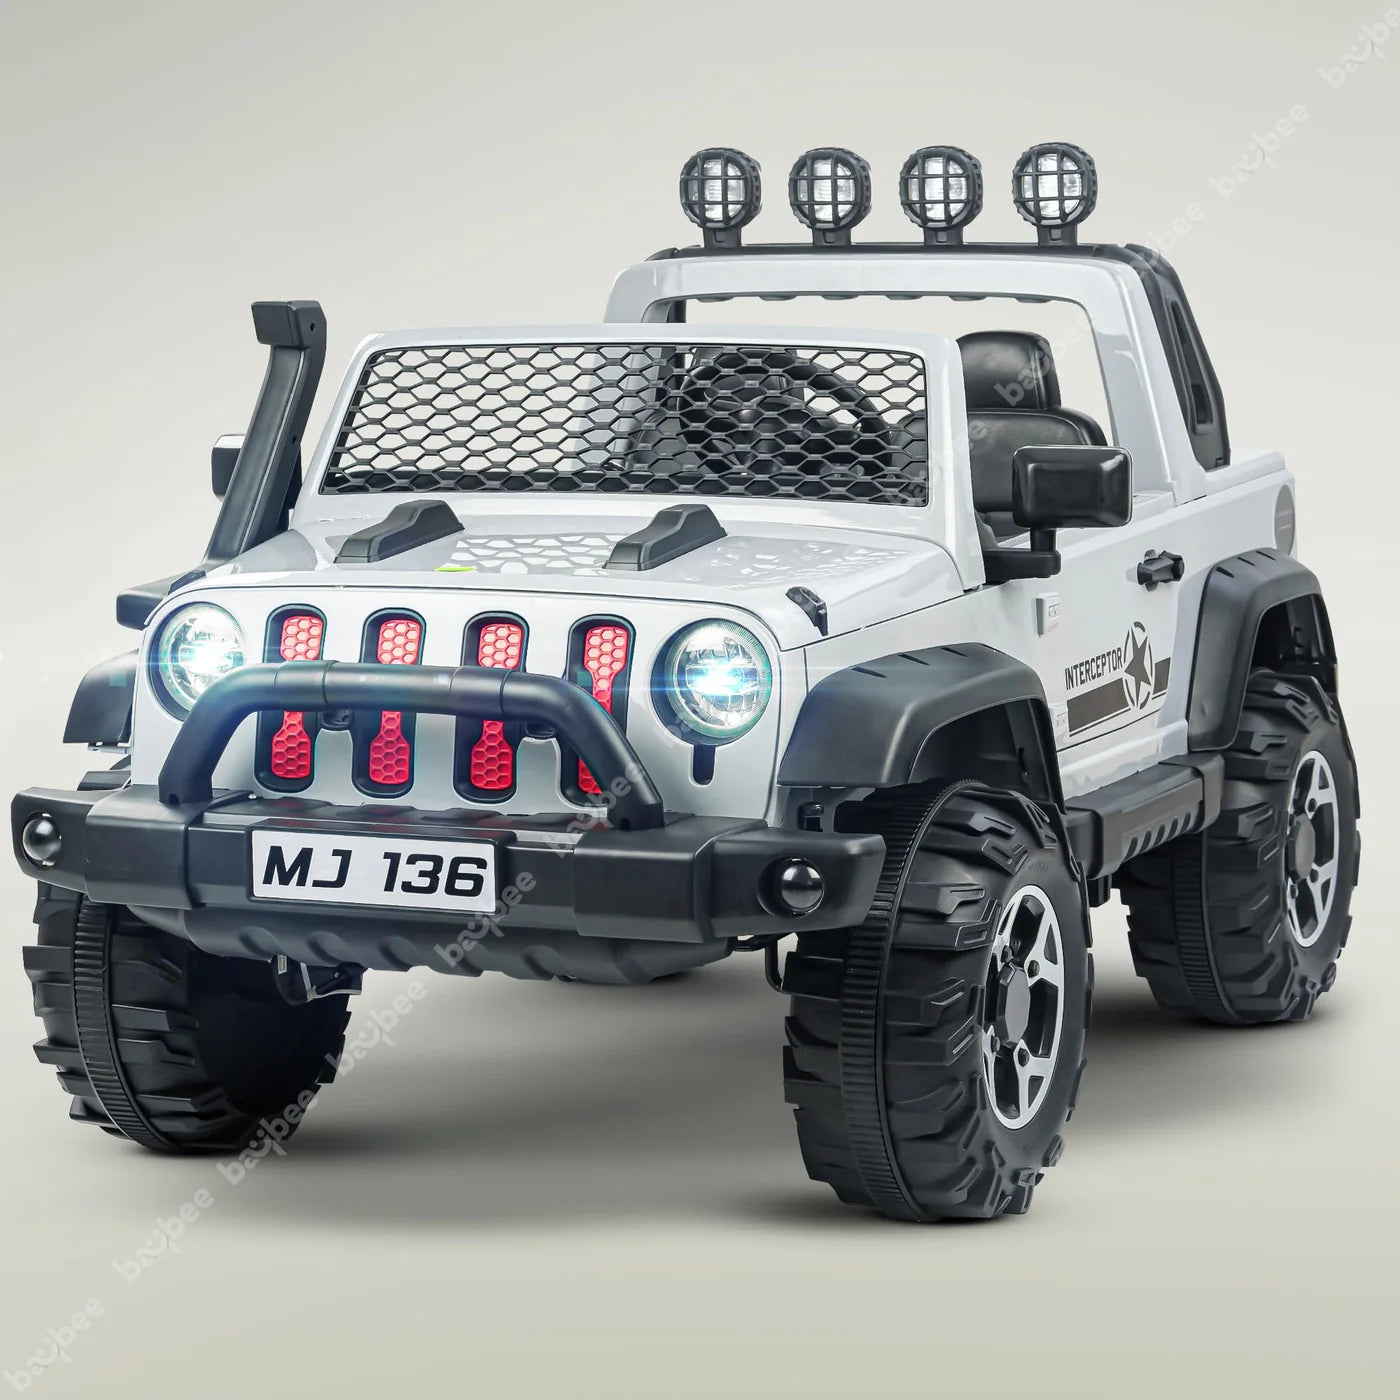 Minikin Atom 4X4 Monster Rechargeable Jeep | Large Size 4 Motors I Premium Quality | Top End Configuration | 1-10 Years